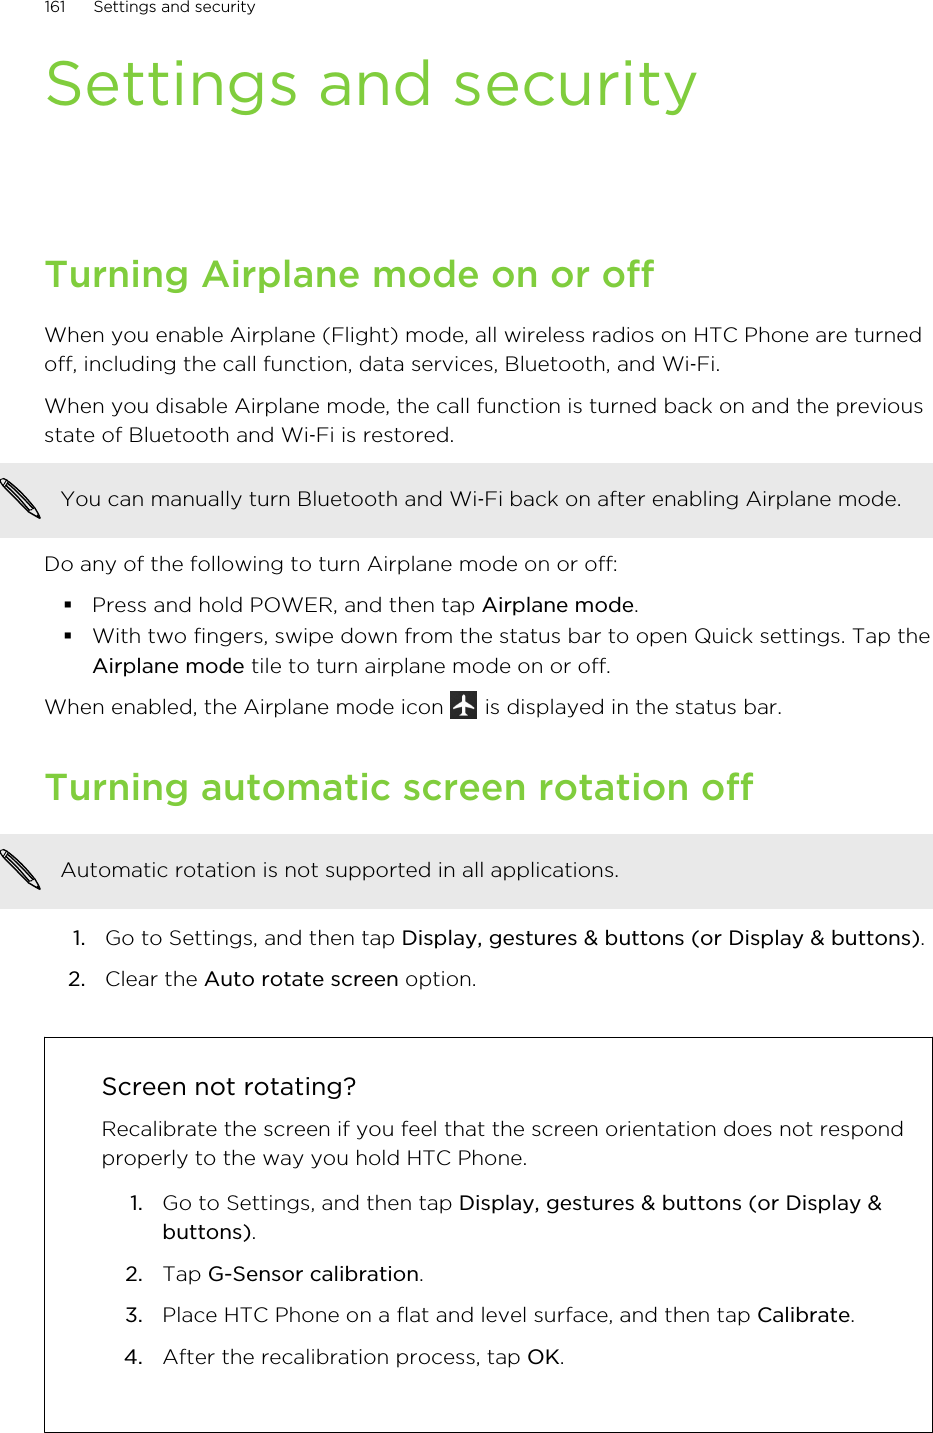 Settings and securityTurning Airplane mode on or offWhen you enable Airplane (Flight) mode, all wireless radios on HTC Phone are turnedoff, including the call function, data services, Bluetooth, and Wi‑Fi.When you disable Airplane mode, the call function is turned back on and the previousstate of Bluetooth and Wi‑Fi is restored.You can manually turn Bluetooth and Wi‑Fi back on after enabling Airplane mode.Do any of the following to turn Airplane mode on or off:§Press and hold POWER, and then tap Airplane mode.§With two fingers, swipe down from the status bar to open Quick settings. Tap theAirplane mode tile to turn airplane mode on or off.When enabled, the Airplane mode icon   is displayed in the status bar.Turning automatic screen rotation offAutomatic rotation is not supported in all applications.1. Go to Settings, and then tap Display, gestures &amp; buttons (or Display &amp; buttons).2. Clear the Auto rotate screen option.Screen not rotating?Recalibrate the screen if you feel that the screen orientation does not respondproperly to the way you hold HTC Phone.1. Go to Settings, and then tap Display, gestures &amp; buttons (or Display &amp;buttons).2. Tap G-Sensor calibration.3. Place HTC Phone on a flat and level surface, and then tap Calibrate.4. After the recalibration process, tap OK.161 Settings and securityHTC Confidential for Certification HTC Confidential for Certification 